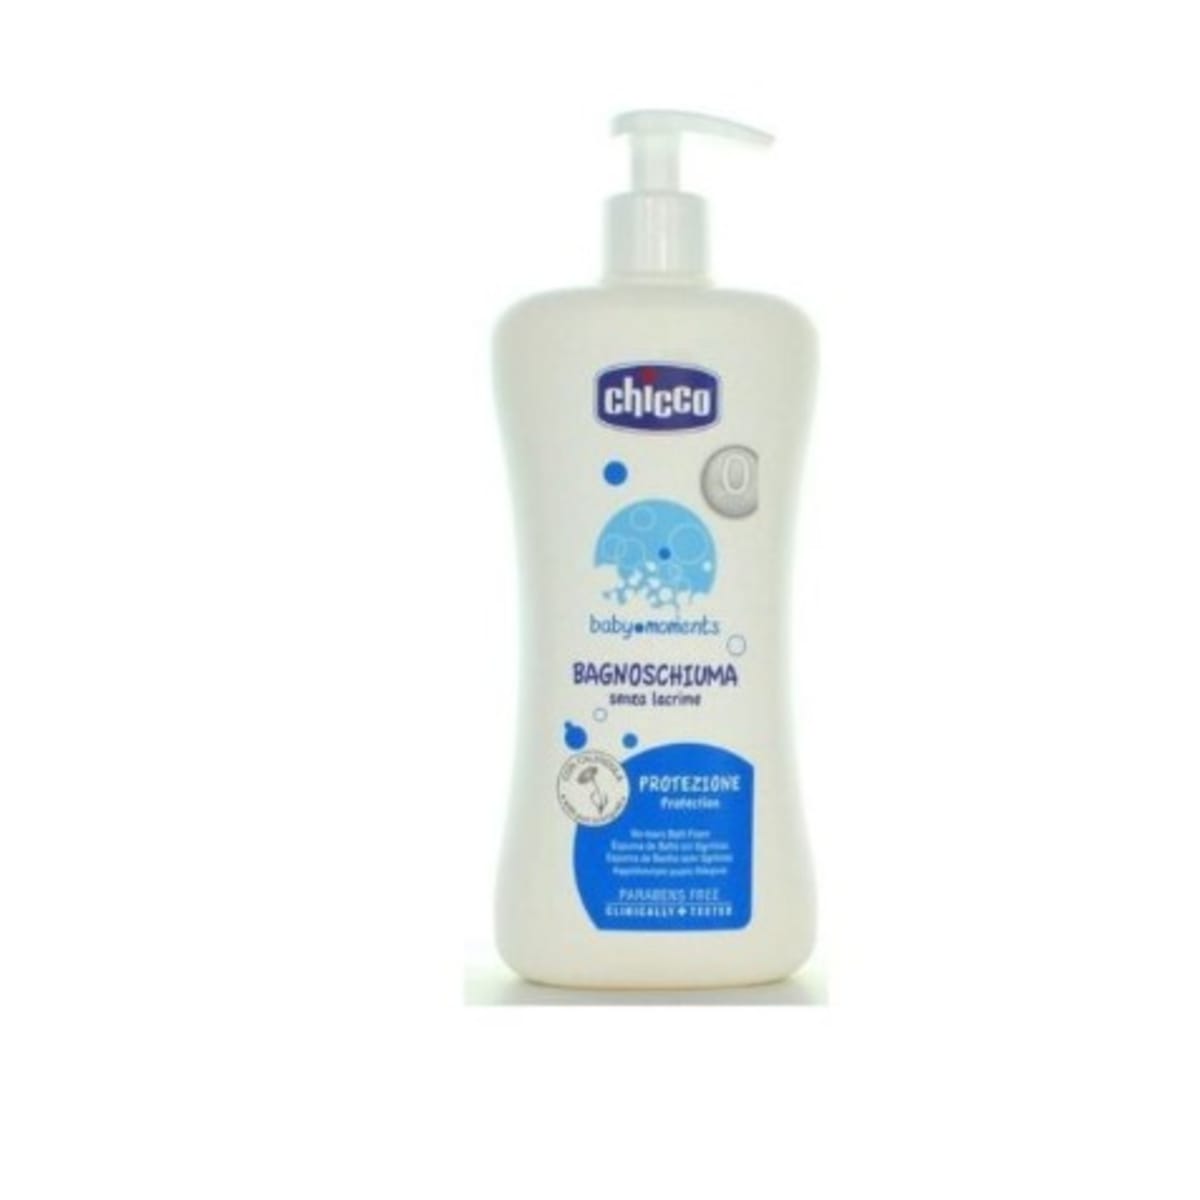 Chicco Baby Moments Essentials - bath - lotion - oil & Powder - 4 Packs